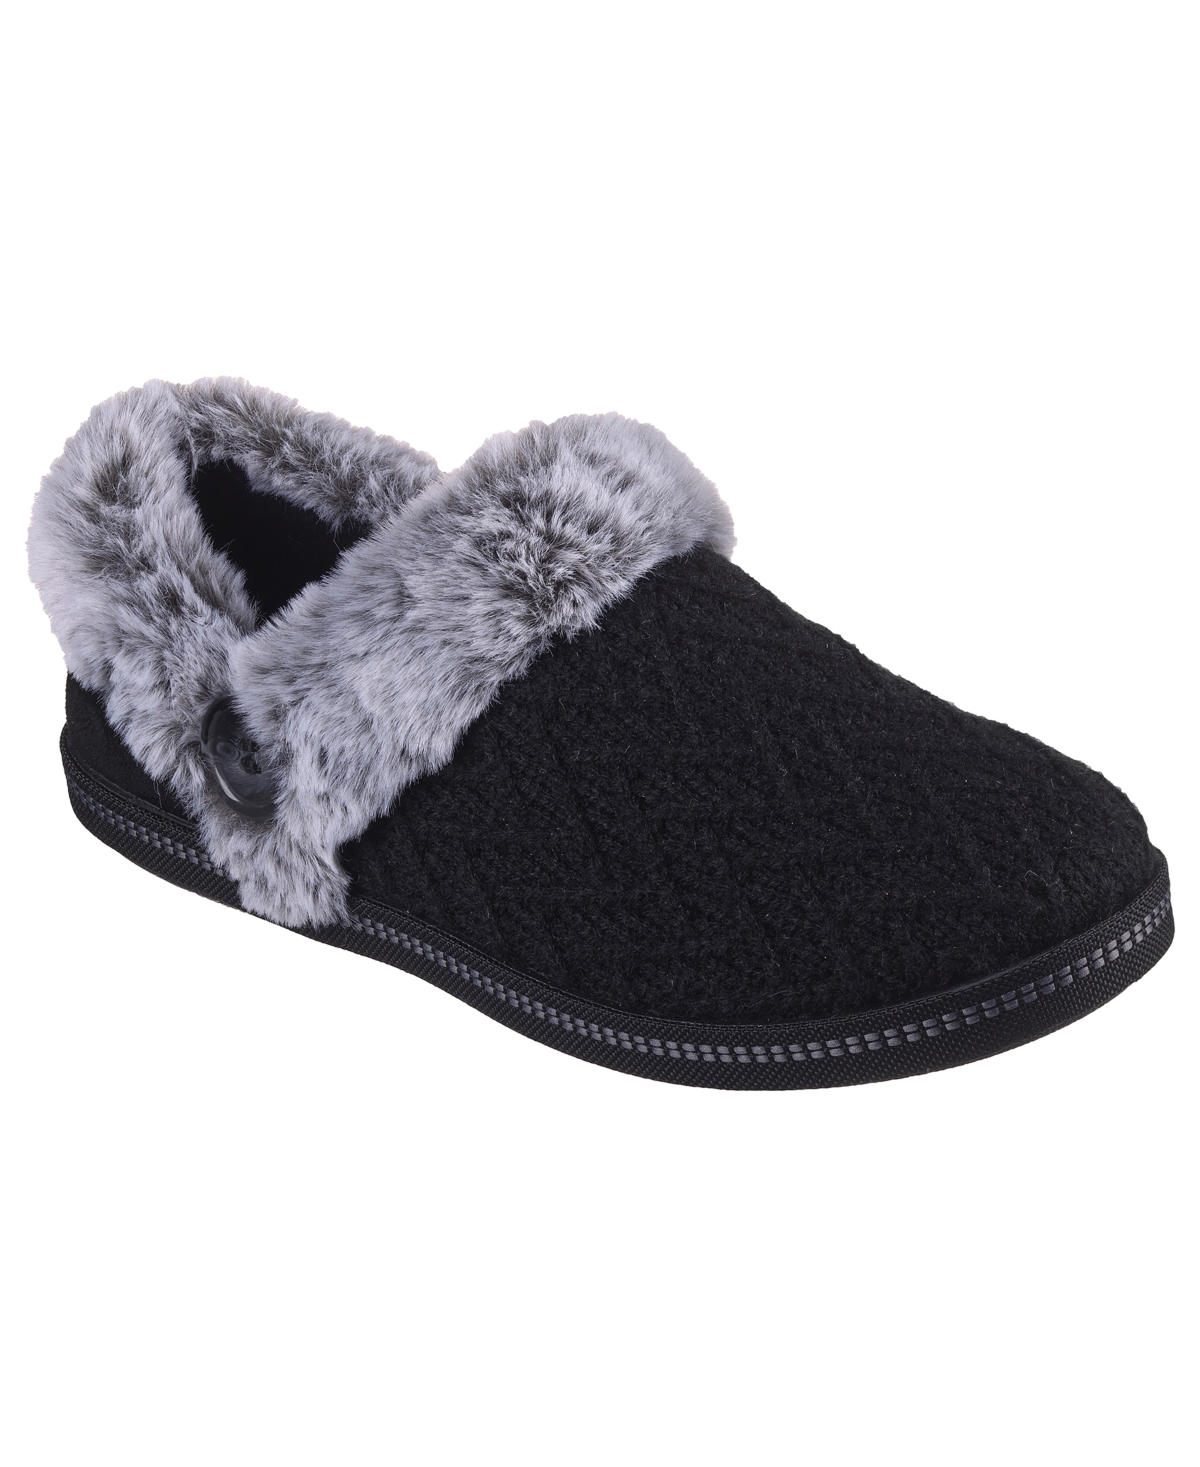 Women's Cozy Campfire - Bright Blossom Slip-On Casual Comfort Slippers from Finish Line - Black